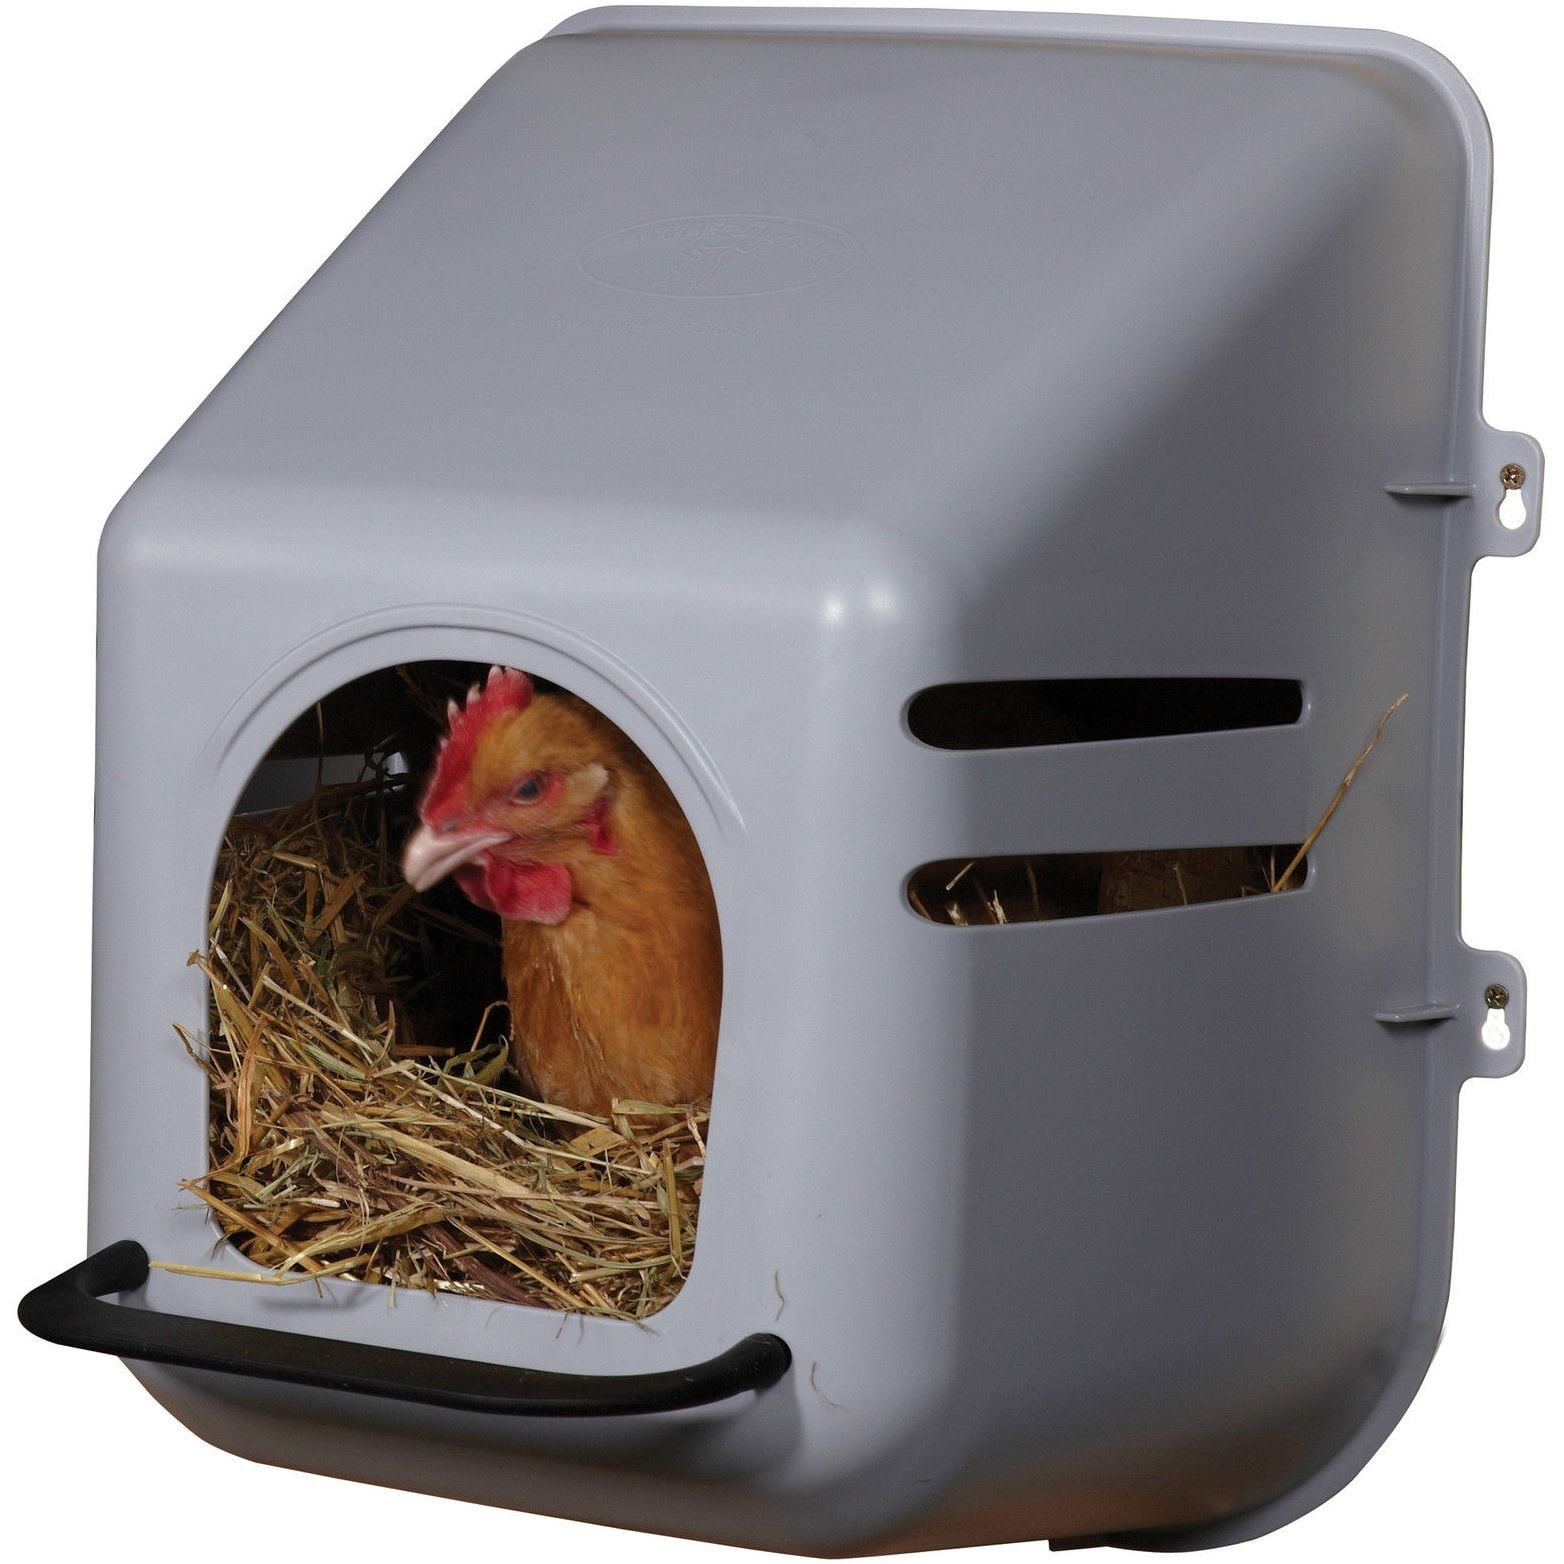 Building the Best Nest Box for Your Chicken Coop